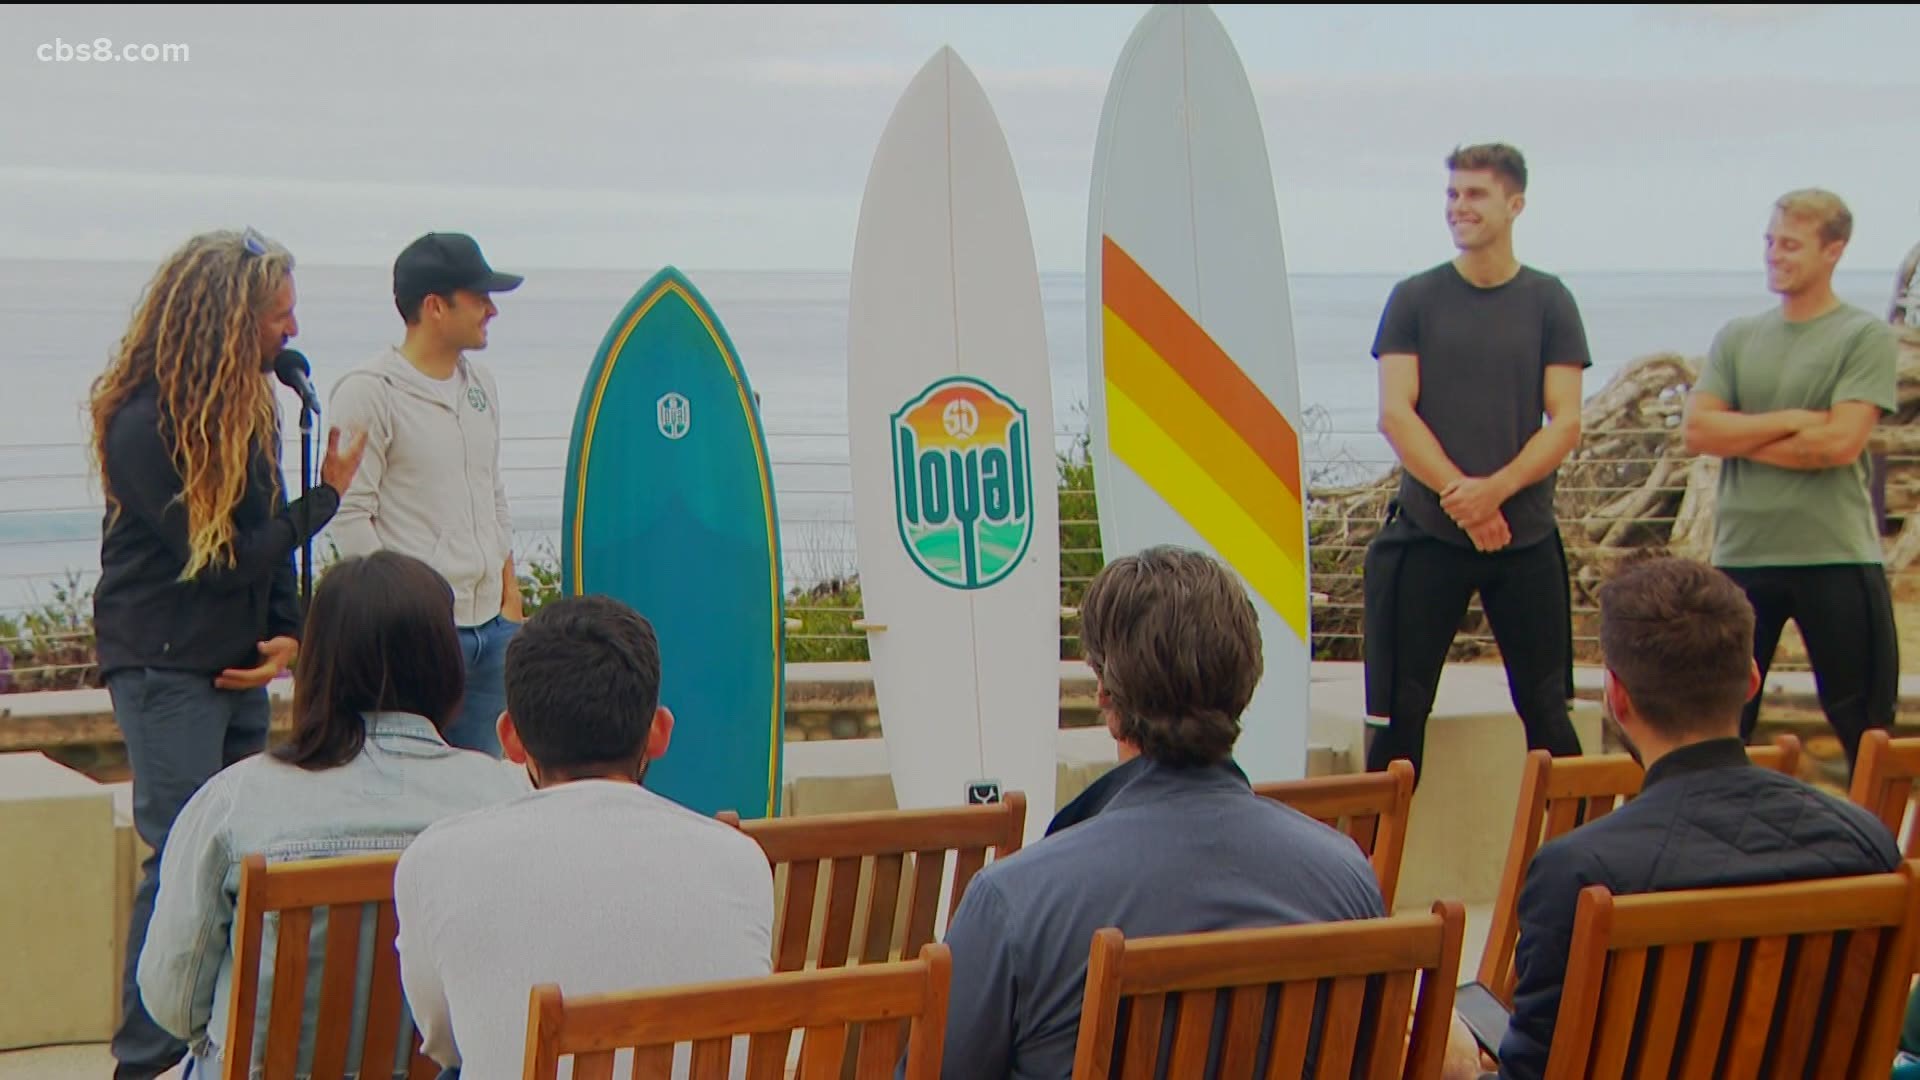 For World Ocean's Day on Tuesday, surf legend Rob Machado announced a partnership with SD Loyal to promote the preservation of oceans in San Diego County.